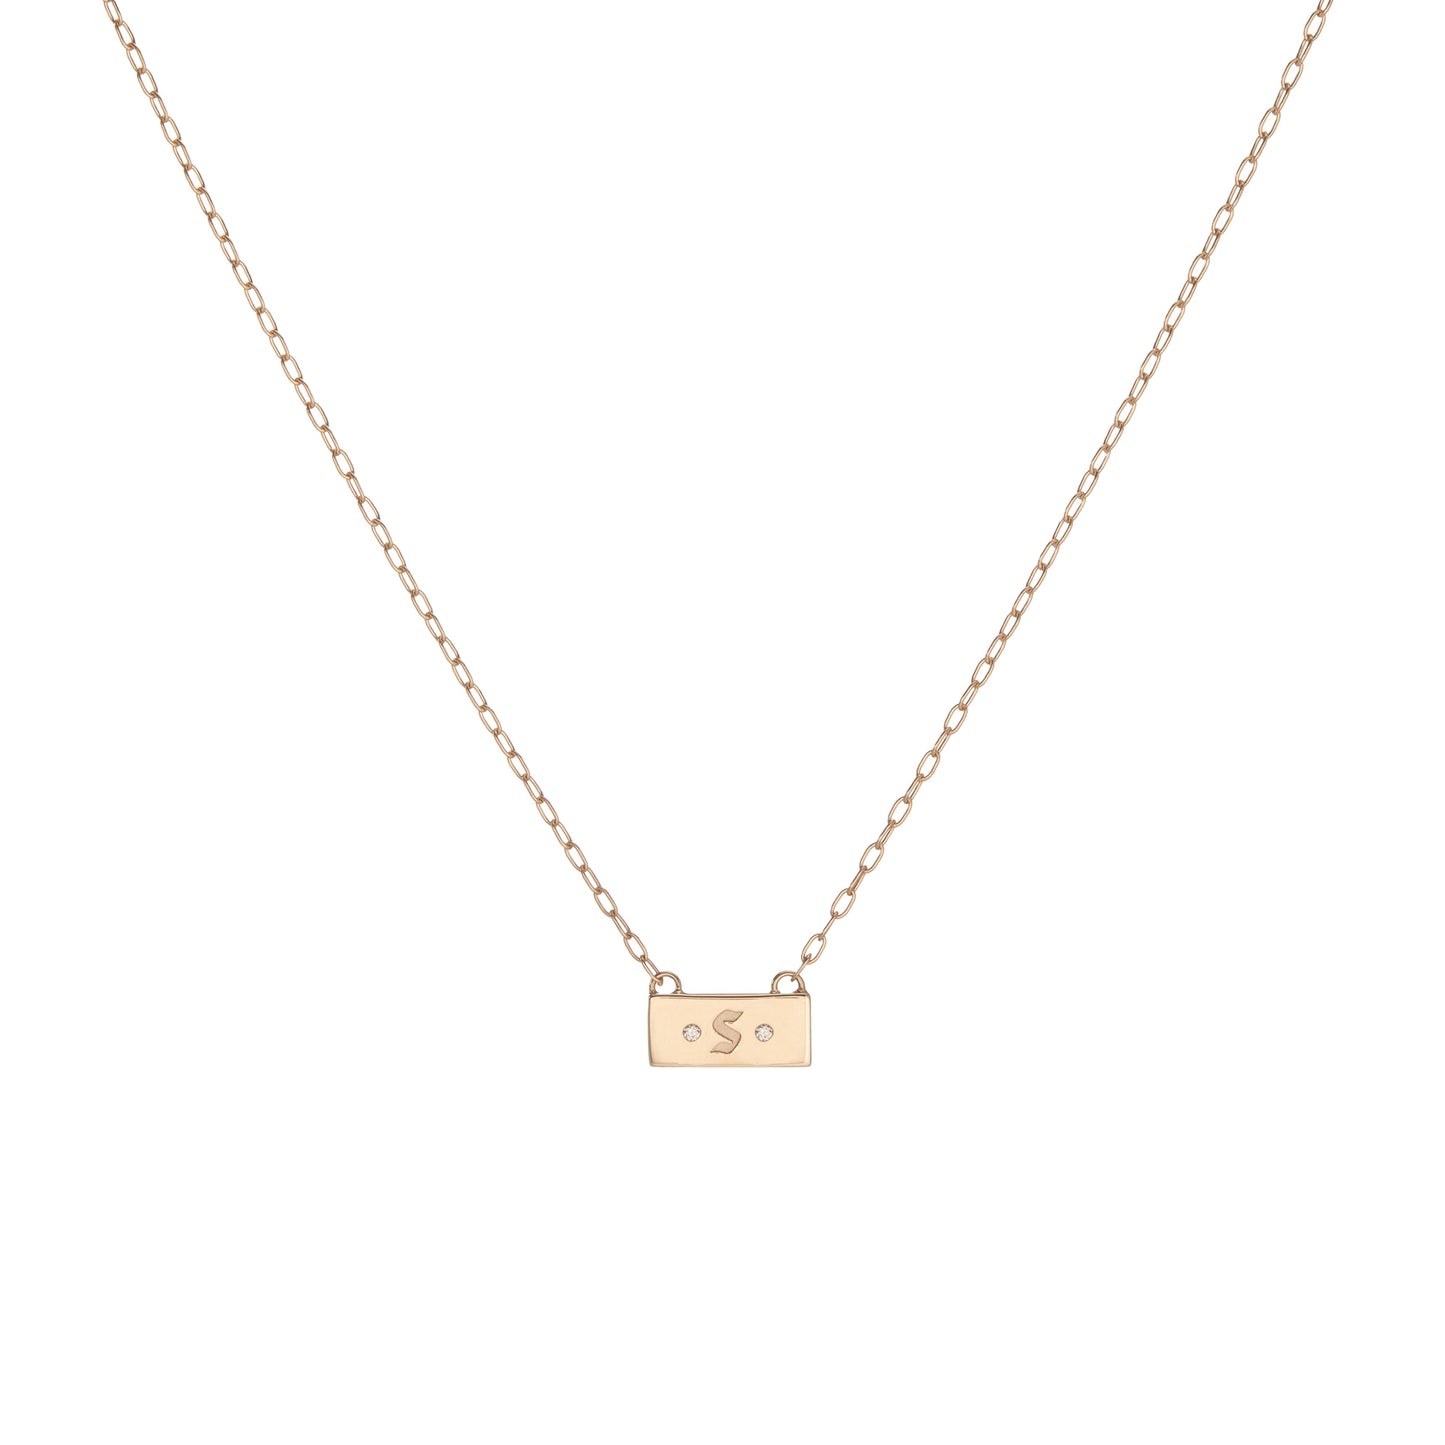 Jennifer Fisher - Gothic Letter S with Two Diamonds Pendant Necklace - Yellow Gold